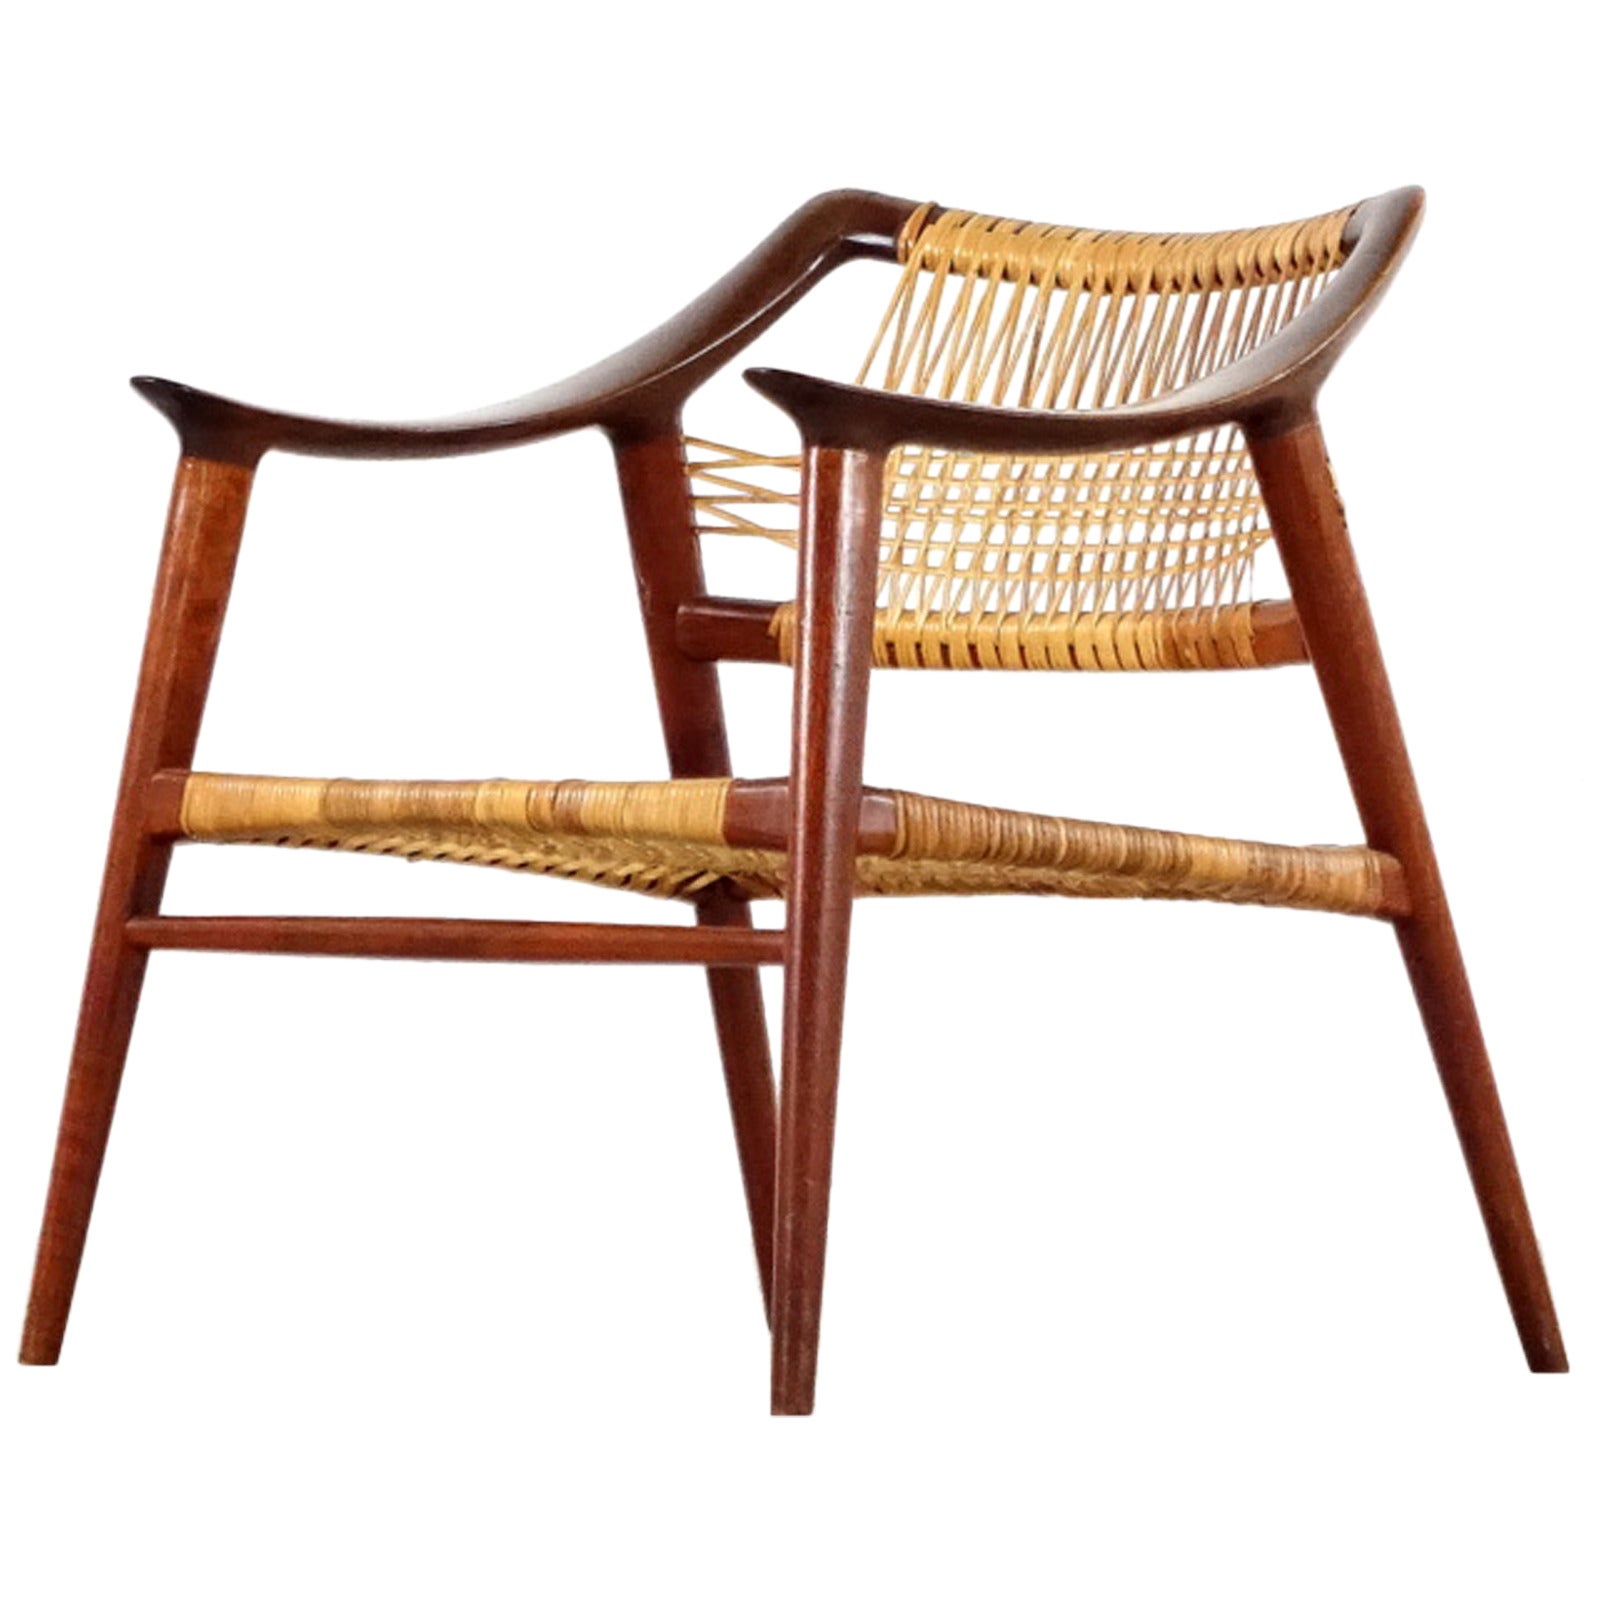 Frederik A. Kayser for Rastad Relling  Chair Produced by Gustav Bahus and EFT